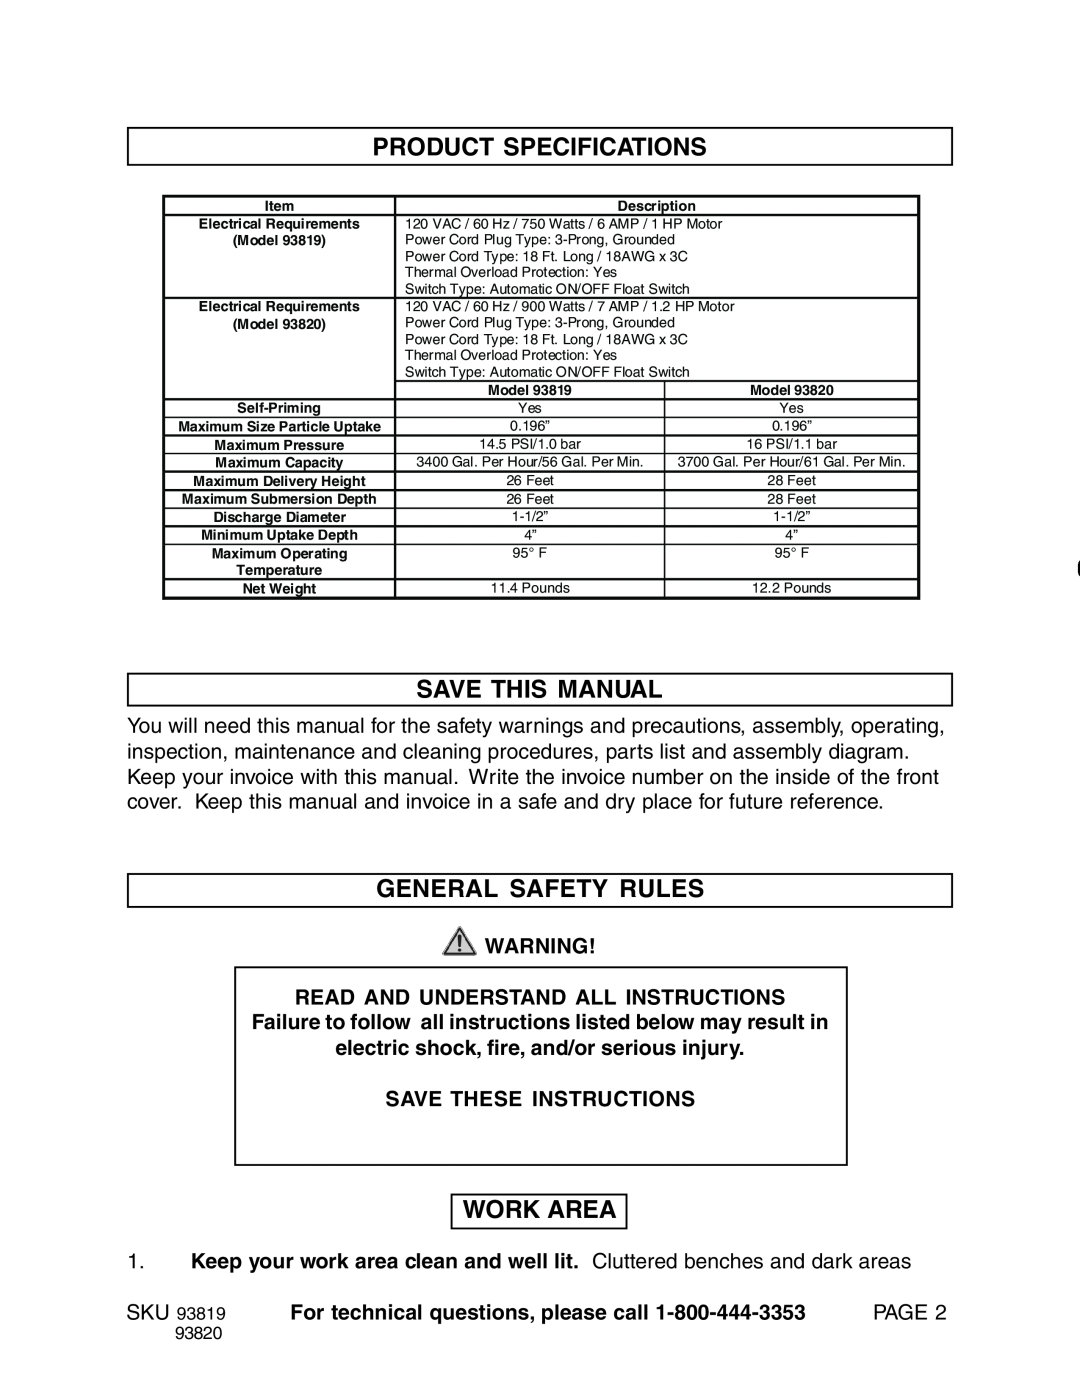 Harbor Freight Tools Model 93819 Product Specifications, Save This Manual, General Safety Rules, Work Area, Page, 93820 